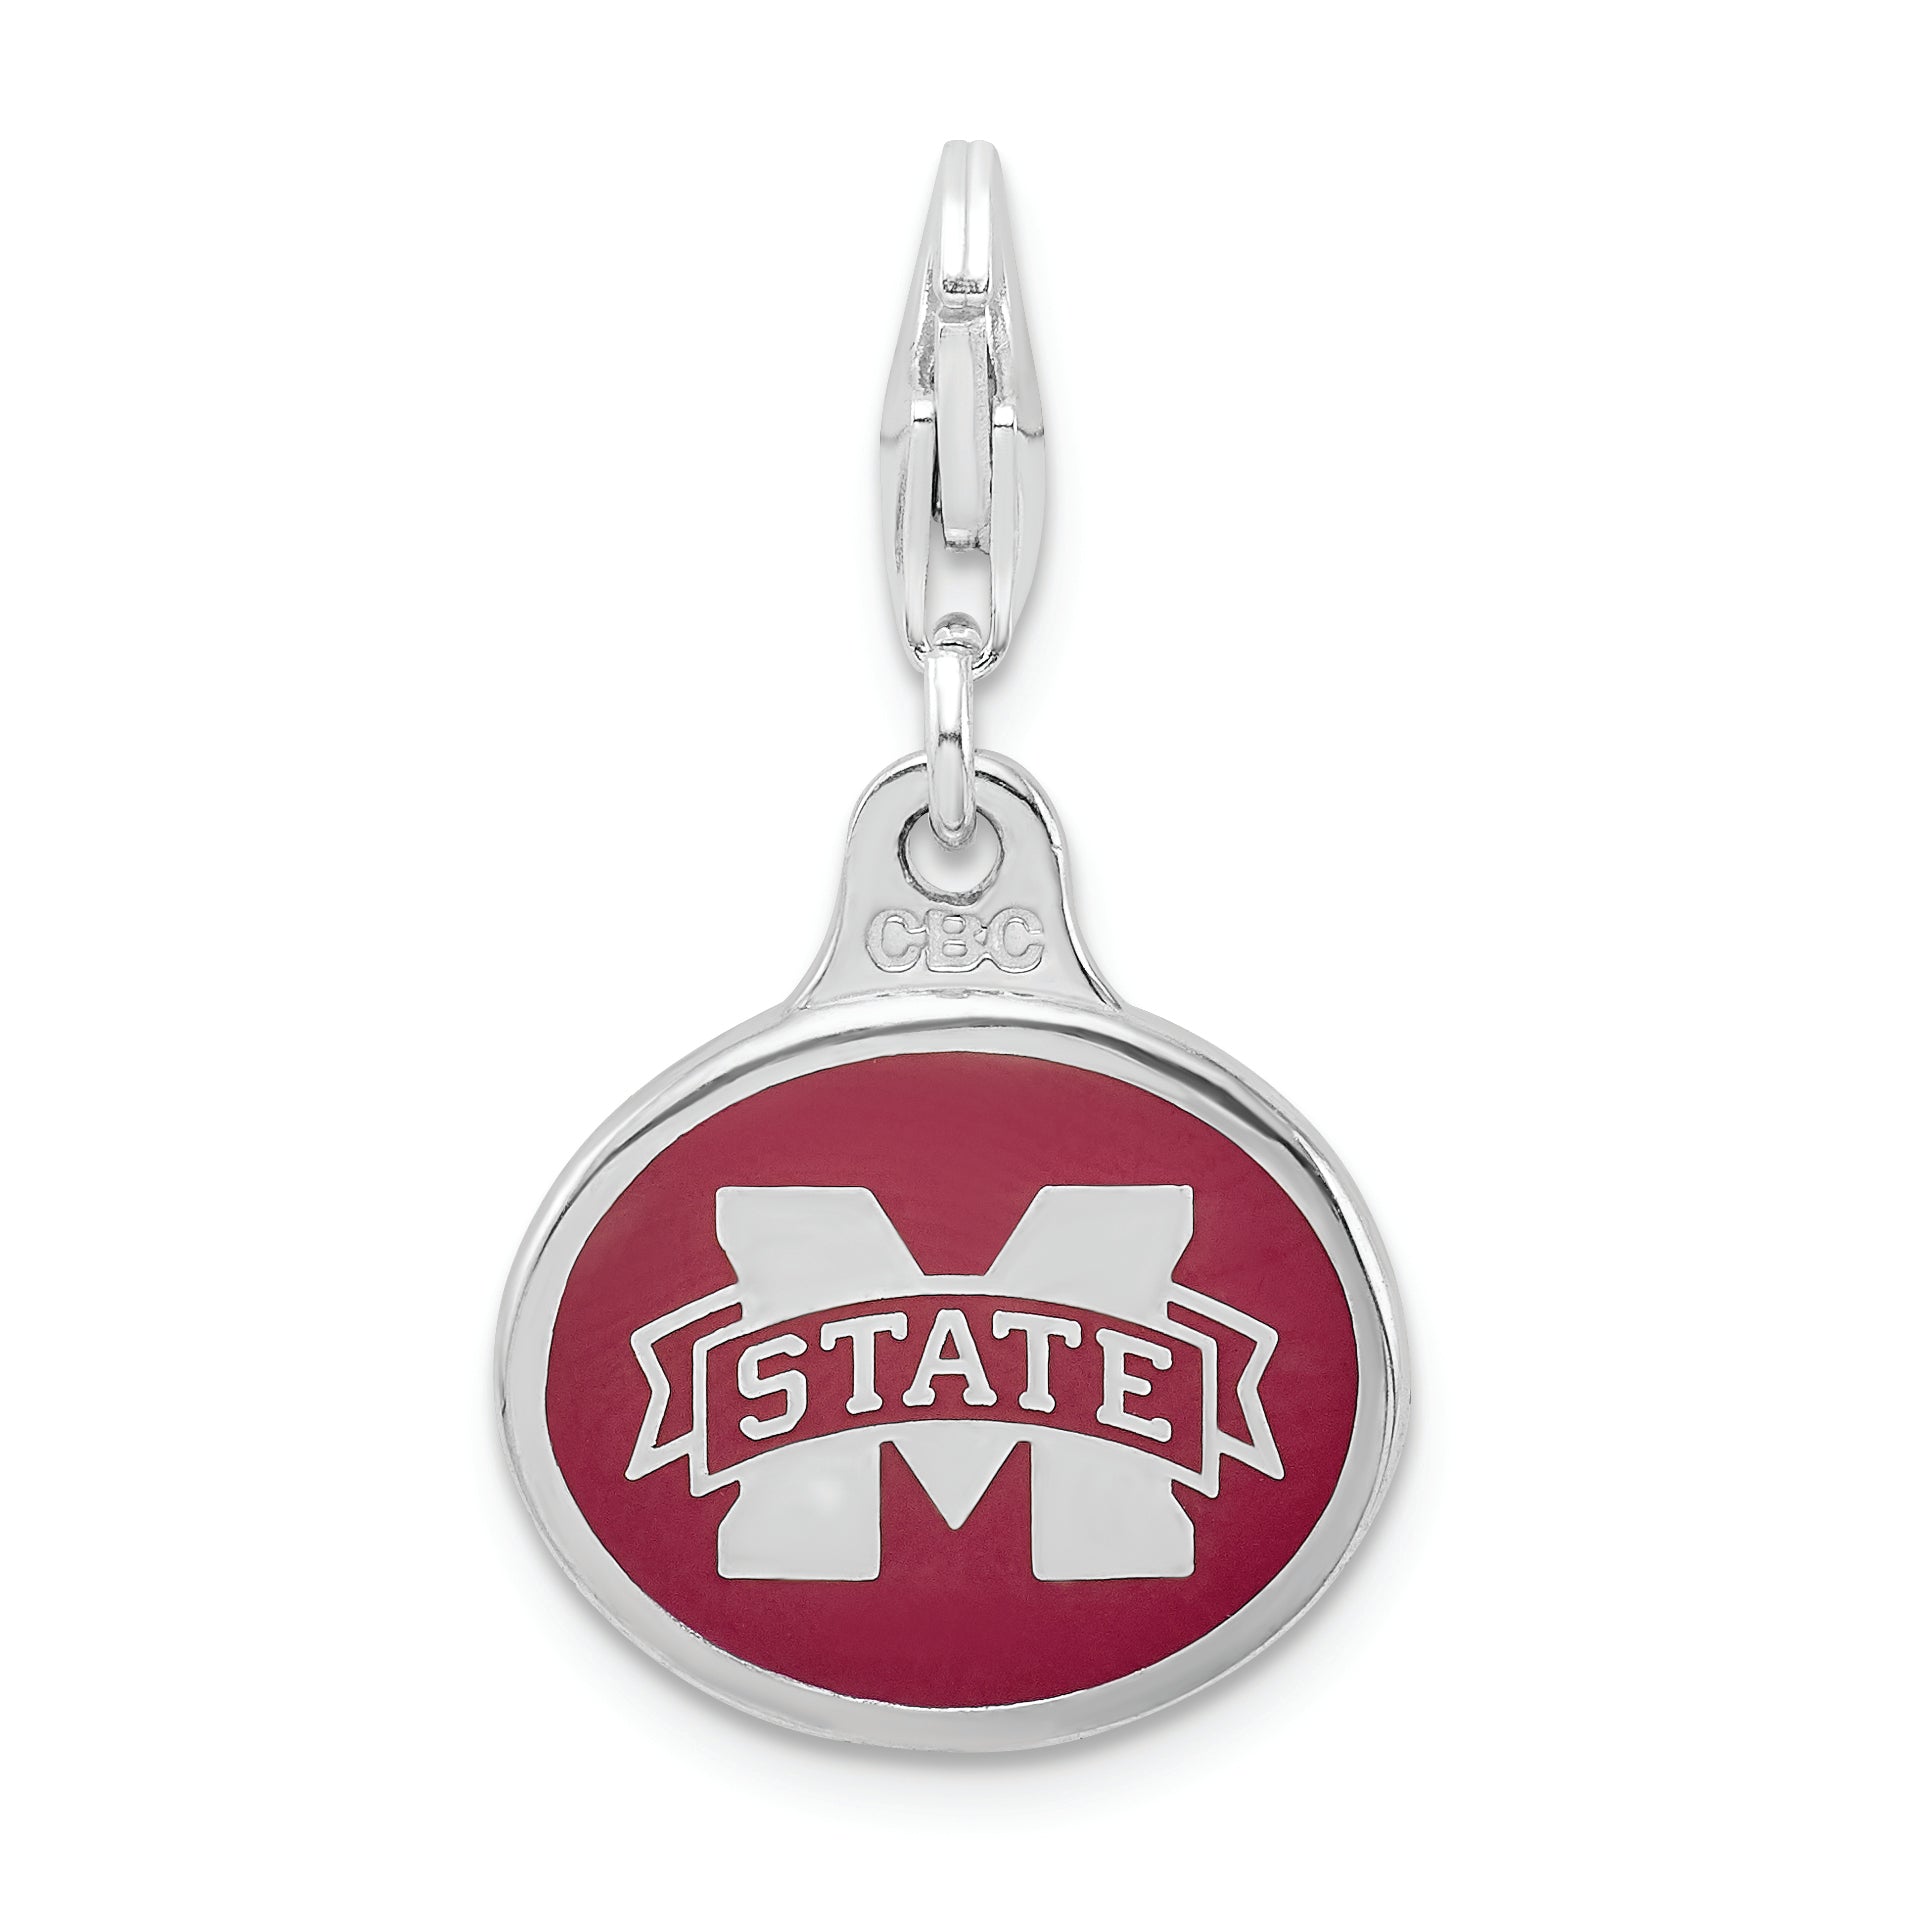 Sterling Silver Enamel Mississippi State Univ. w/ Lobster Clasp Charm